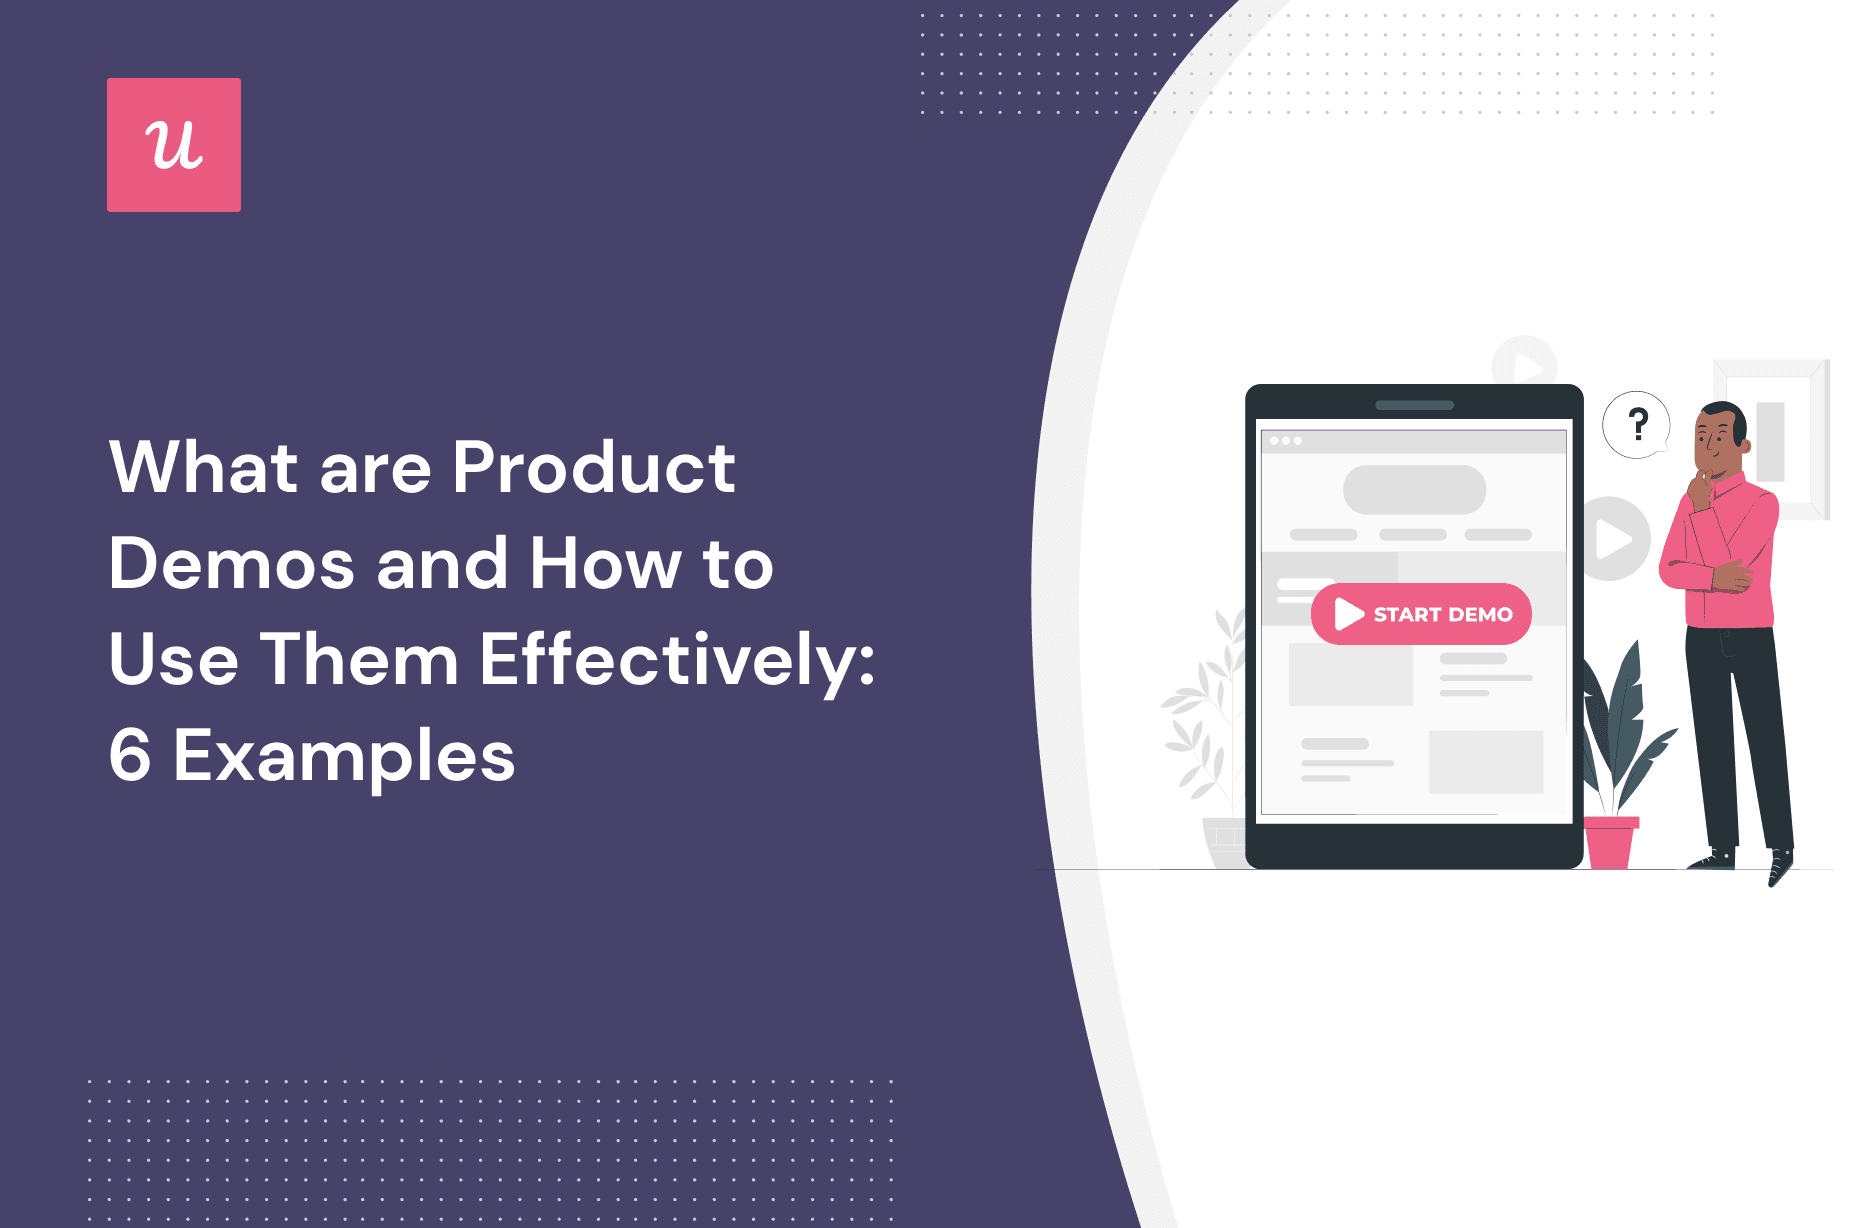 What are Product Demos and How to Use Them Effectively: 6 Examples cover